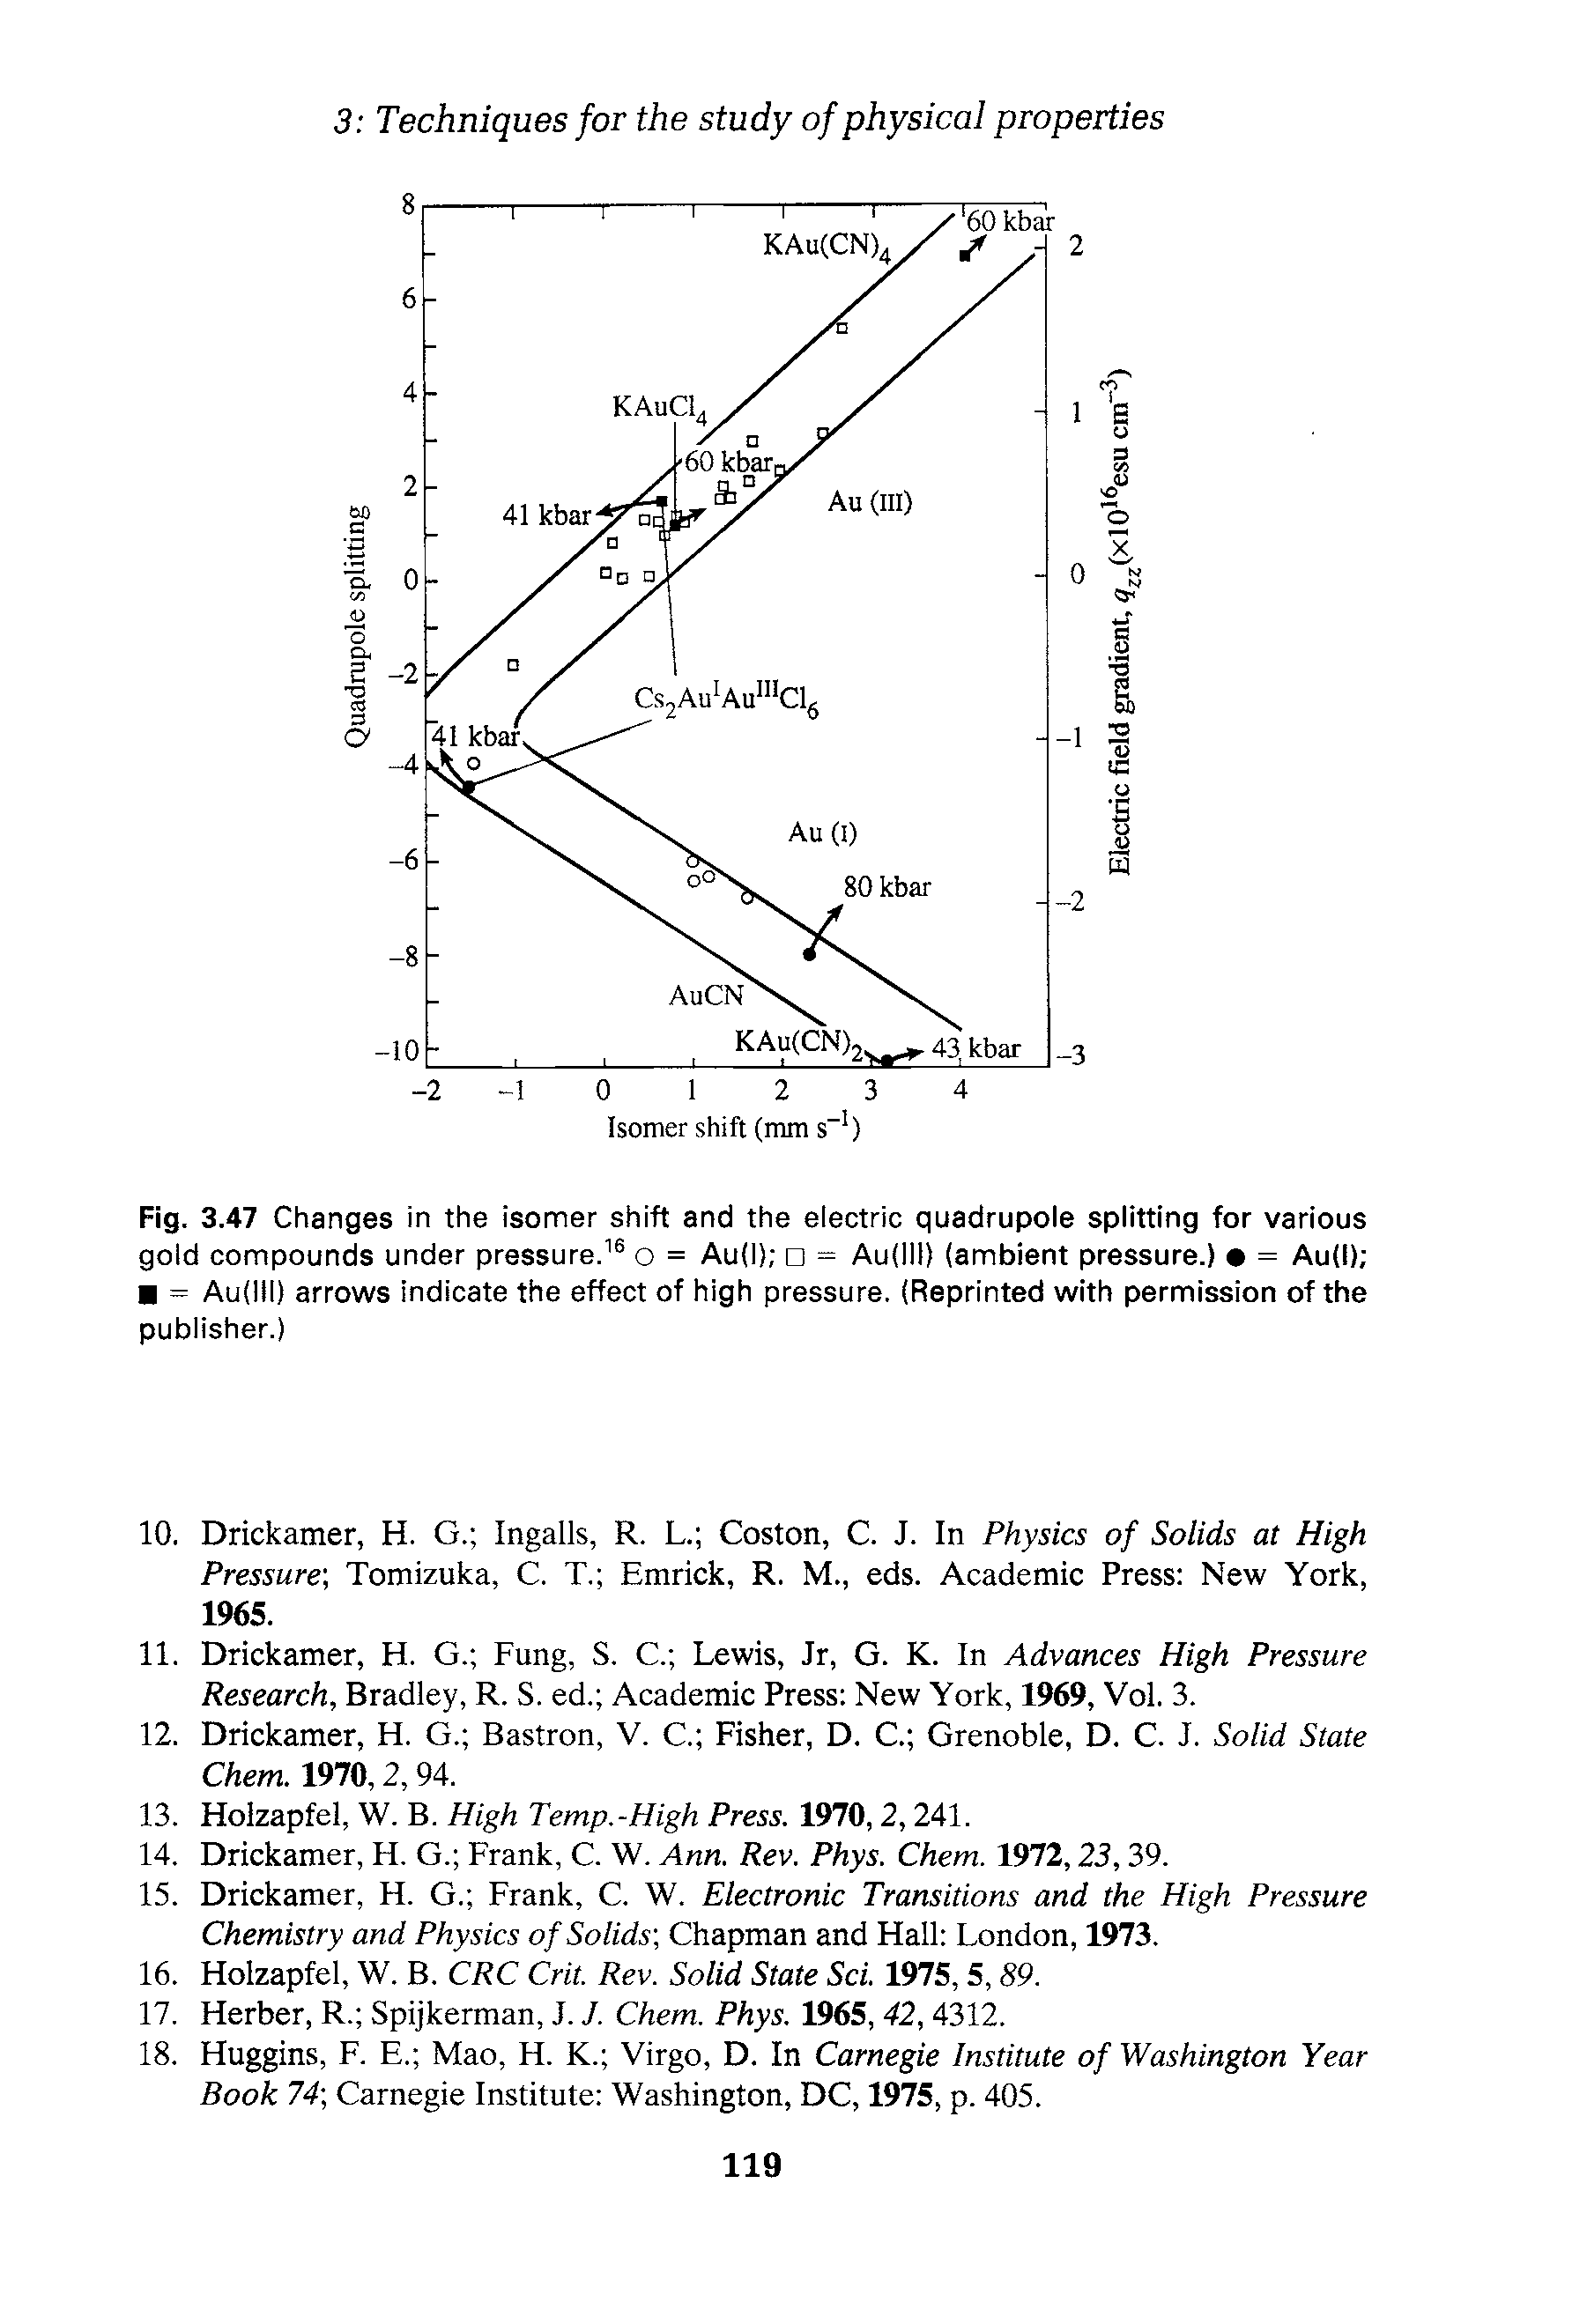 Fig. 3.47 Changes in the isomer shift and the electric quadrupole splitting for various gold compounds under pressure. o = Au(l) = Au(lll) (ambient pressure.) = Au(l) = Au(lll) arrows indicate the effect of high pressure. (Reprinted with permission of the publisher.)...